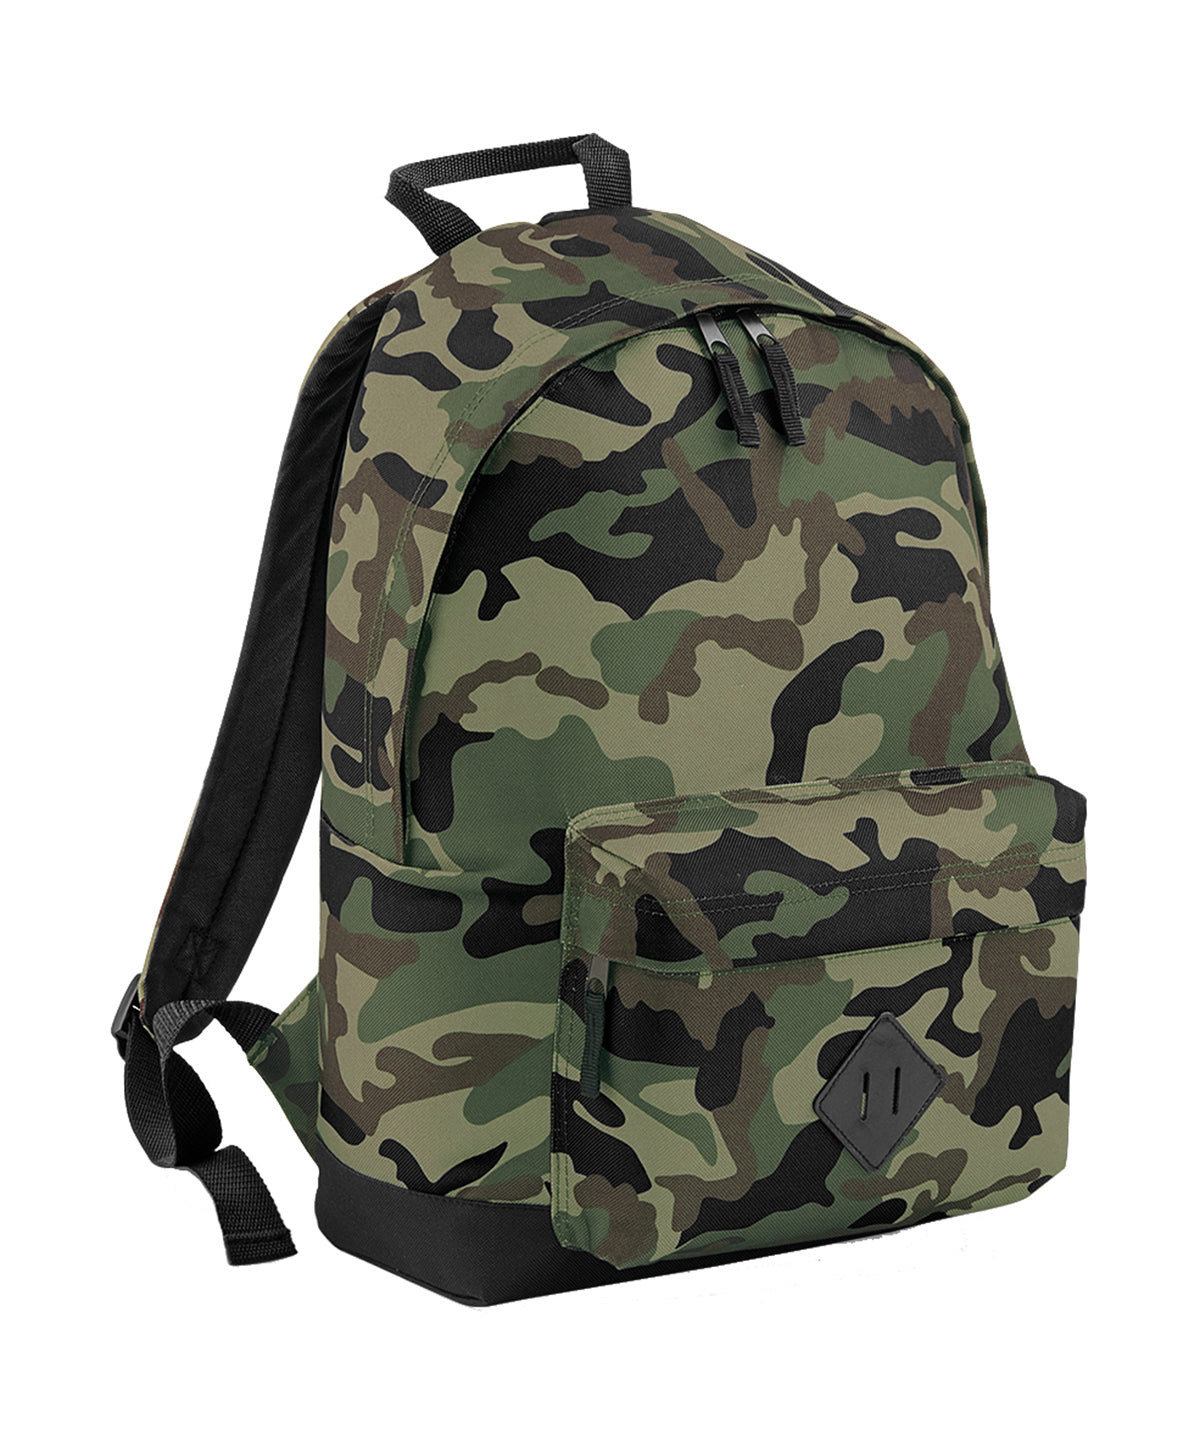 Personalised Bags - Camouflage Bagbase Camo backpack